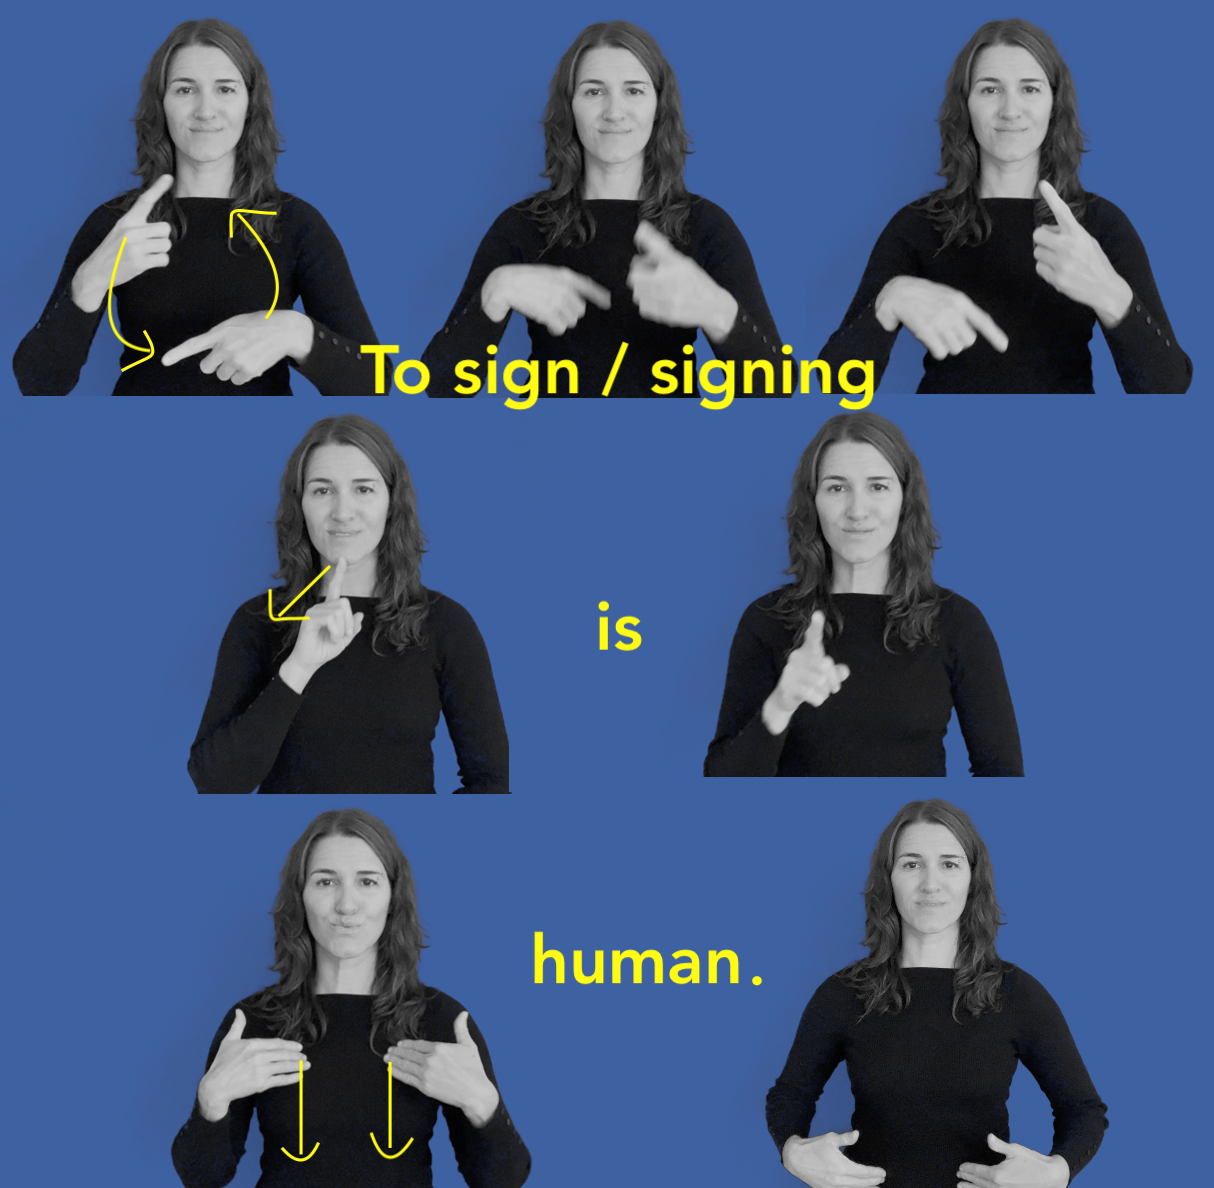 To Sign is Human   Close up of a sign language interpreter with long hair demonstrates in several photos with her two hands and body language how to sign the words "To Sign is Human" in three steps.